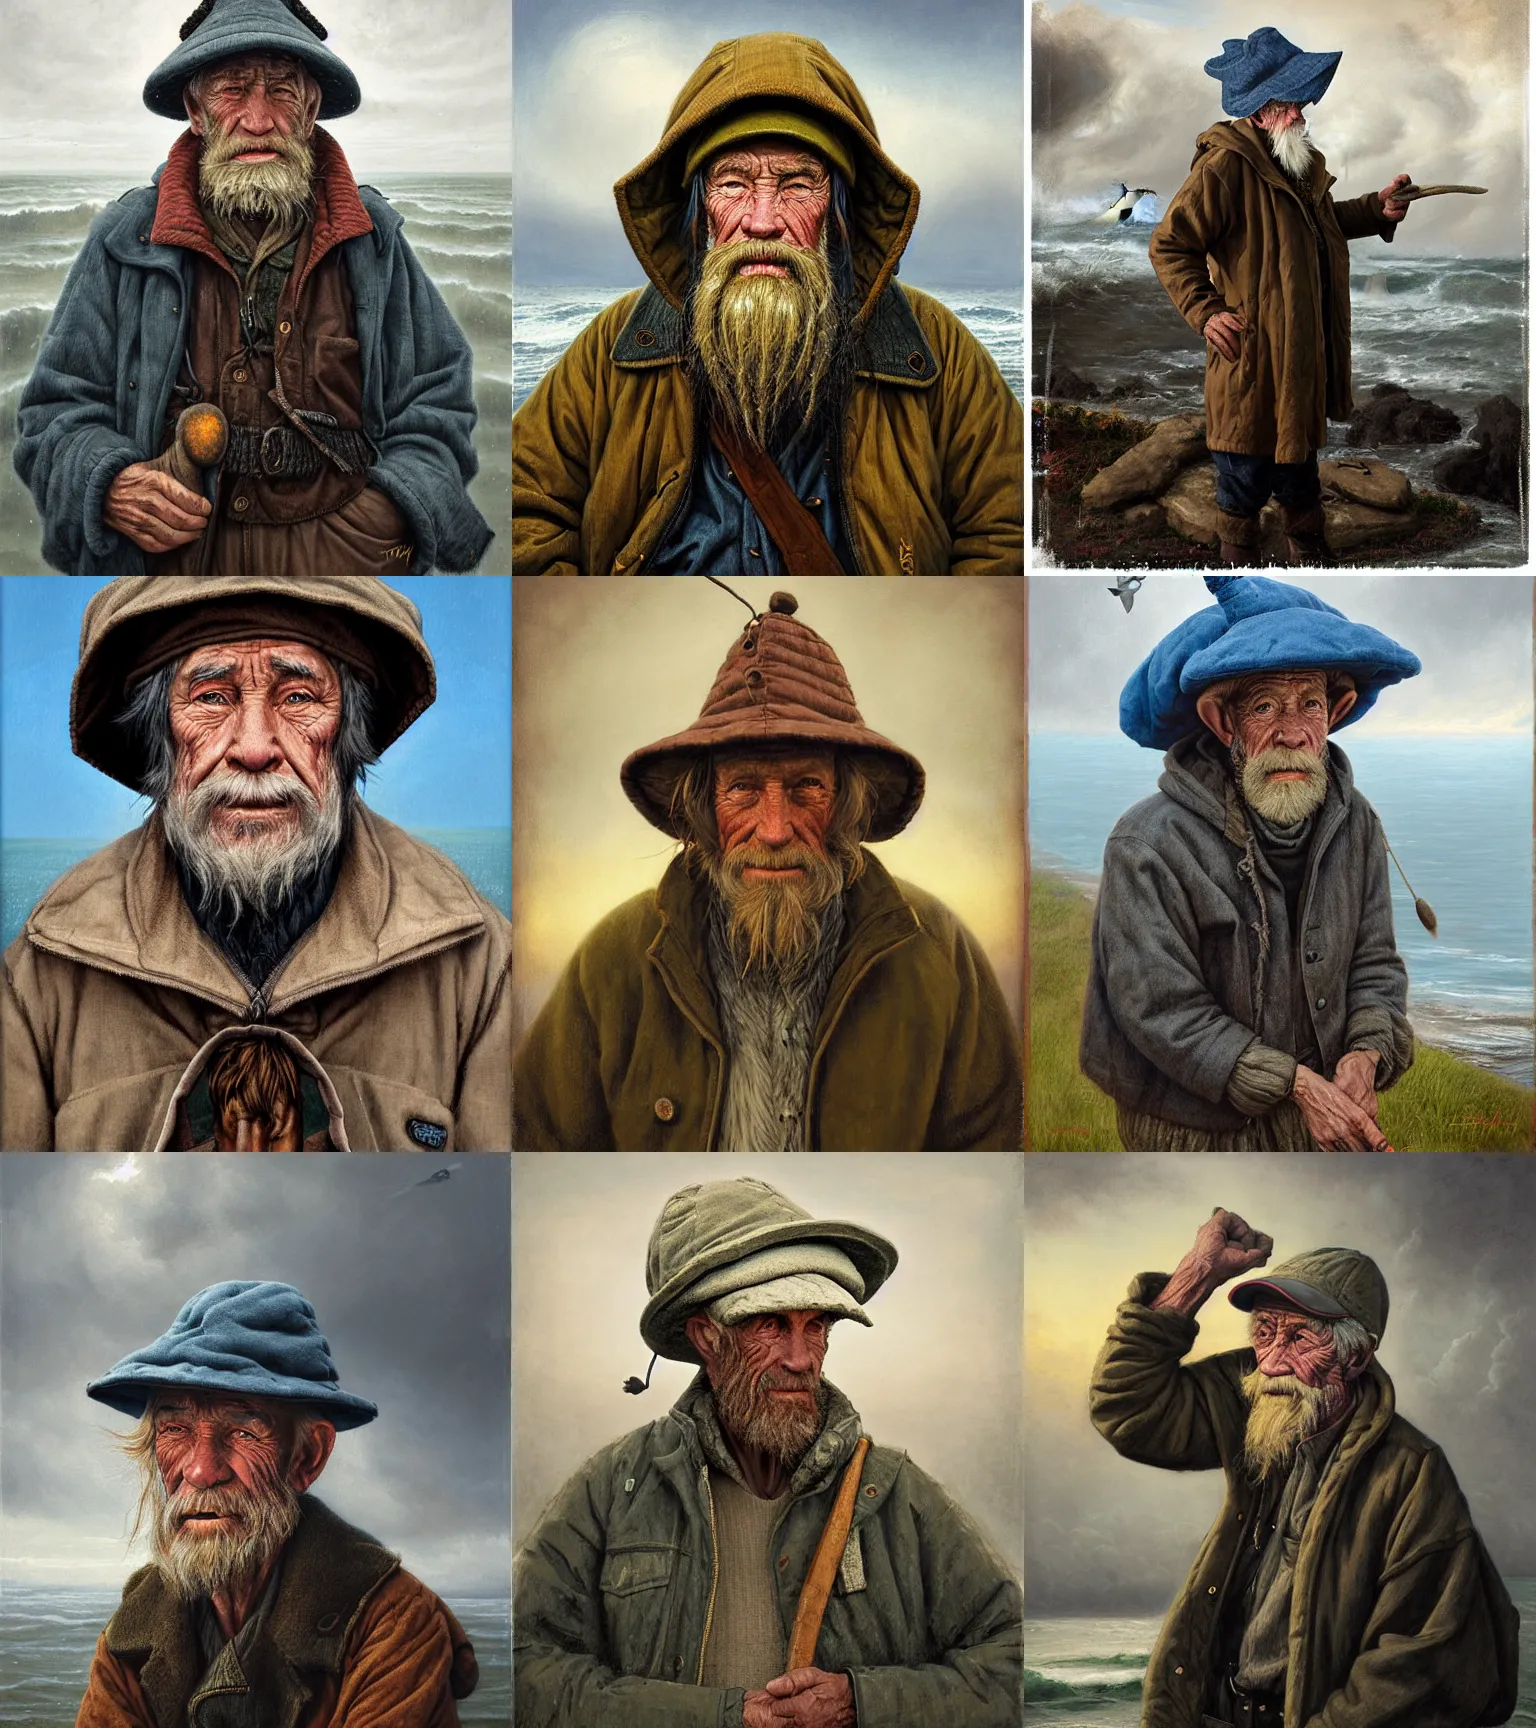 Prompt: Portrait of a old fisherman in storm jacket and hat, with head of donkey Eeyore from disney cartoon, by Tom Bagshaw and Manuel Sanjulian